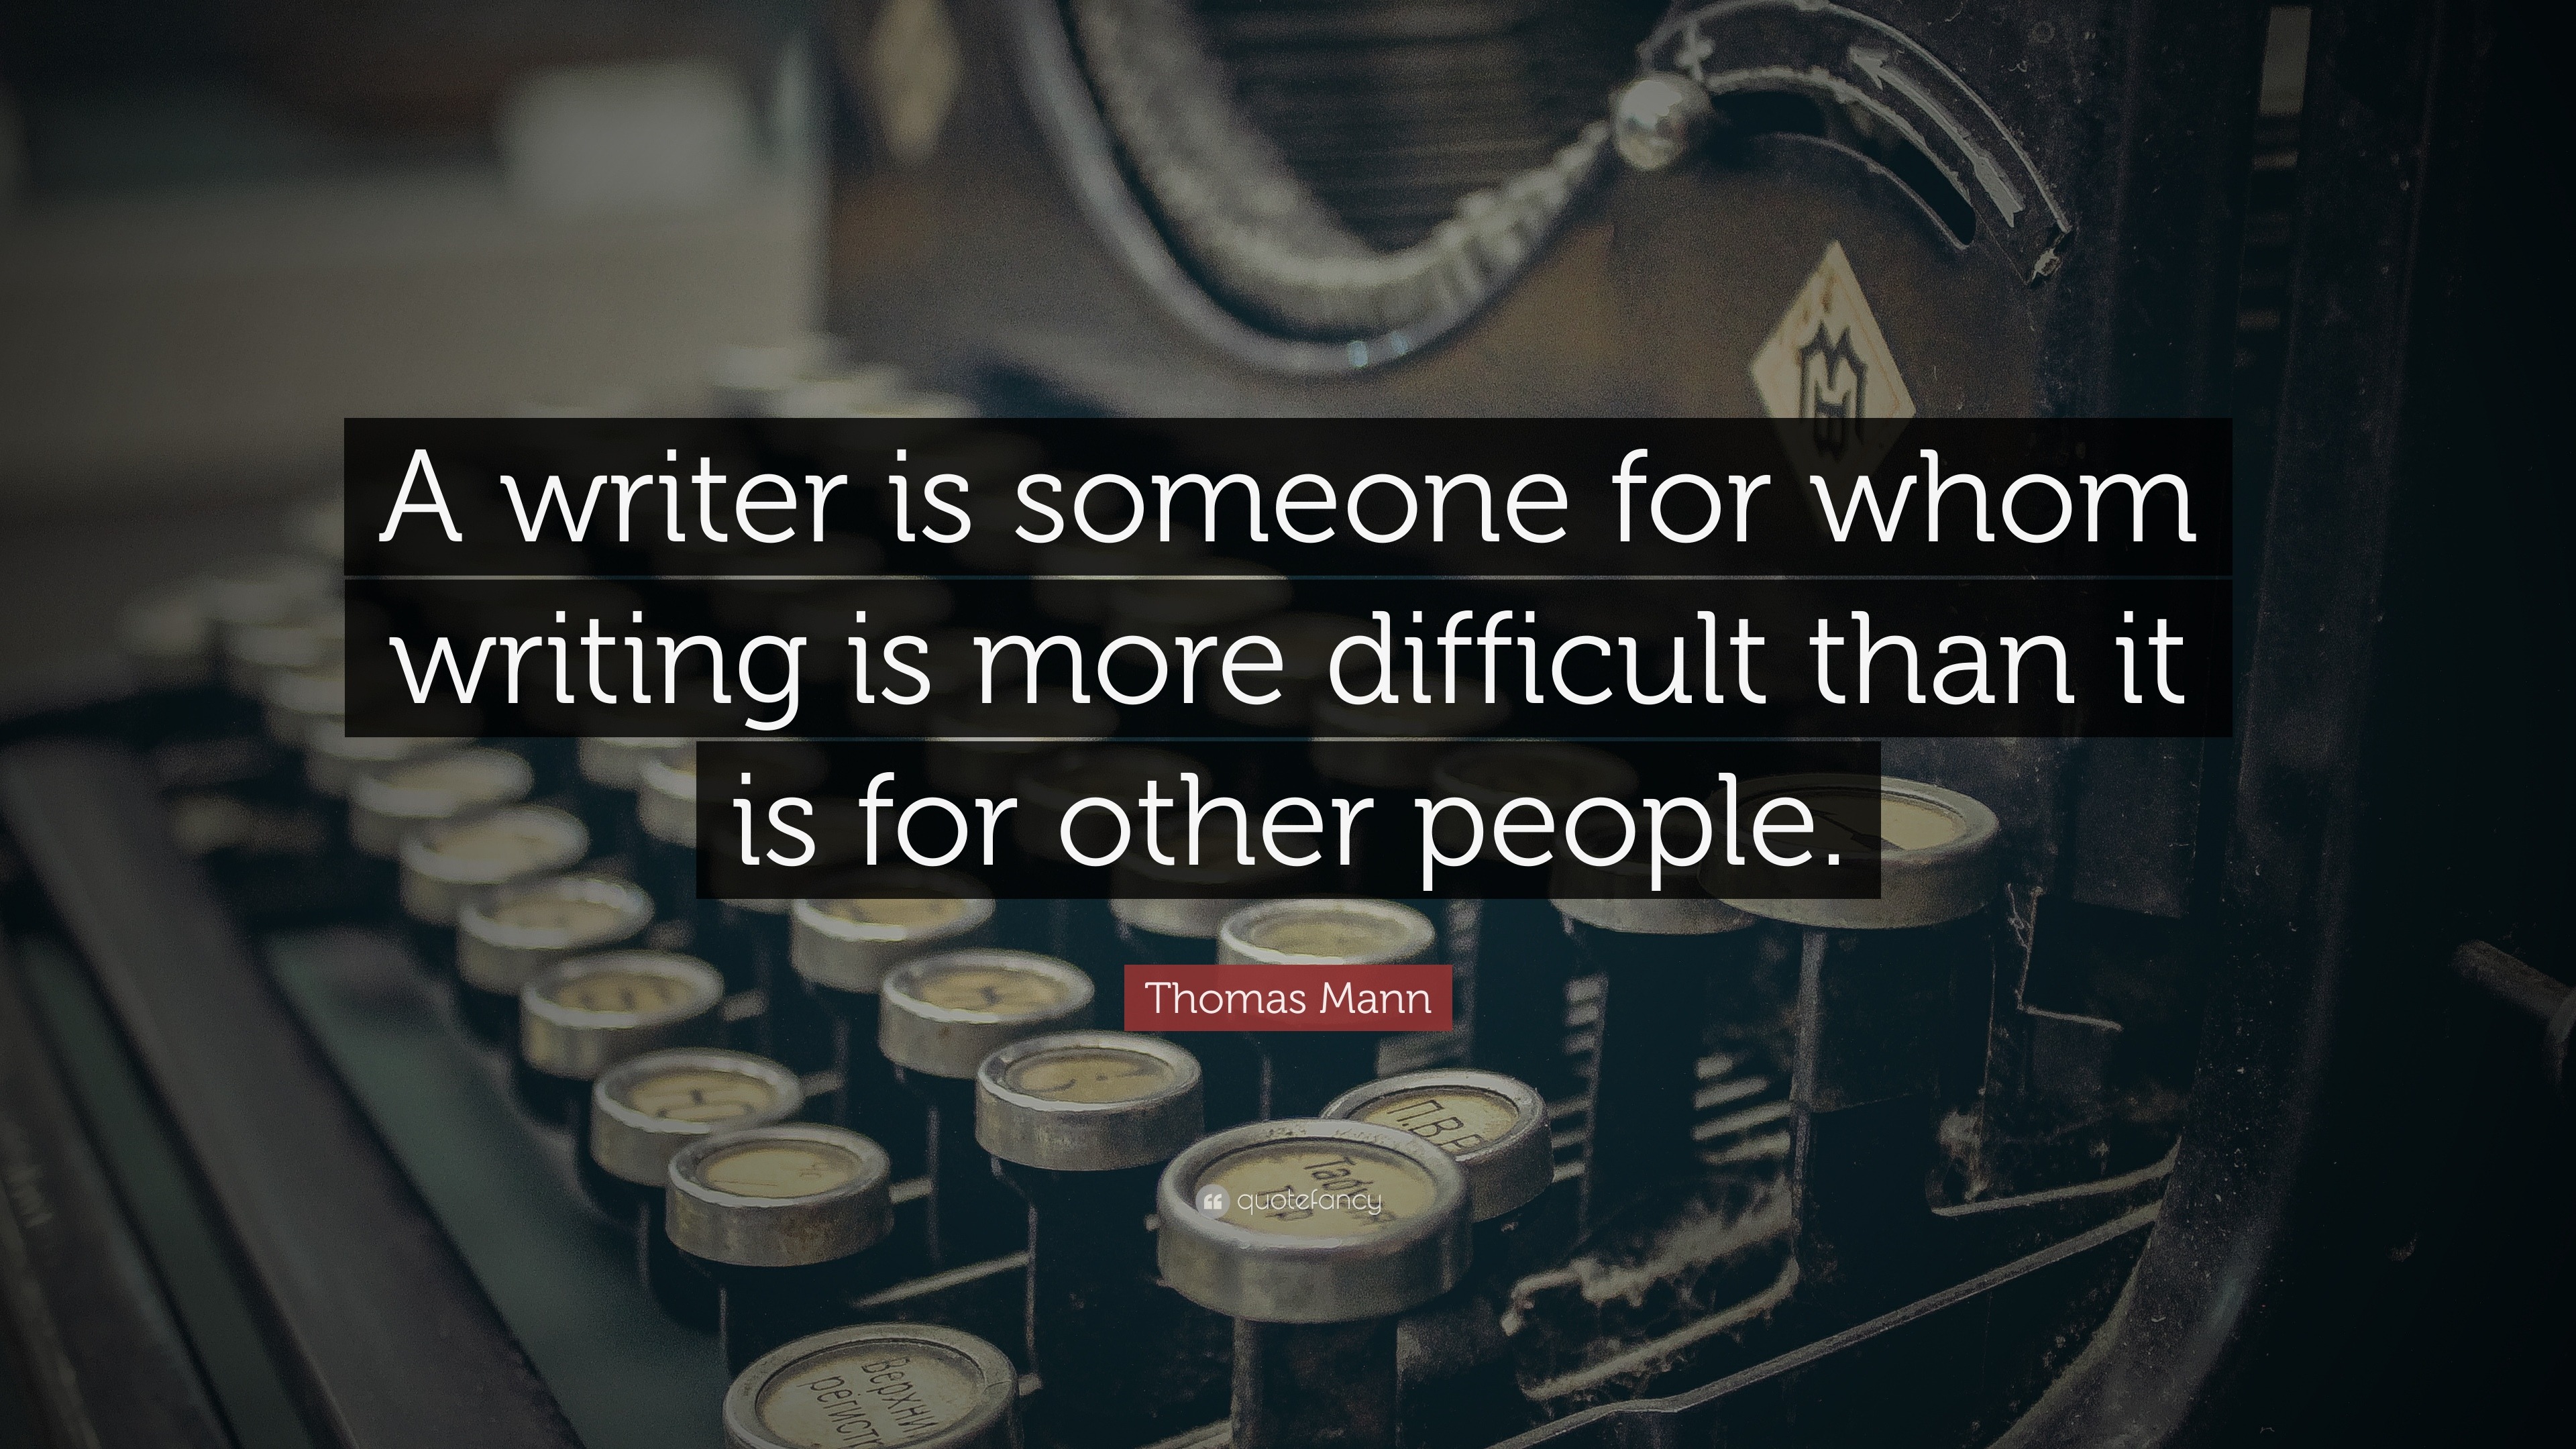 Quotes About Writing (57 wallpapers) - Quotefancy